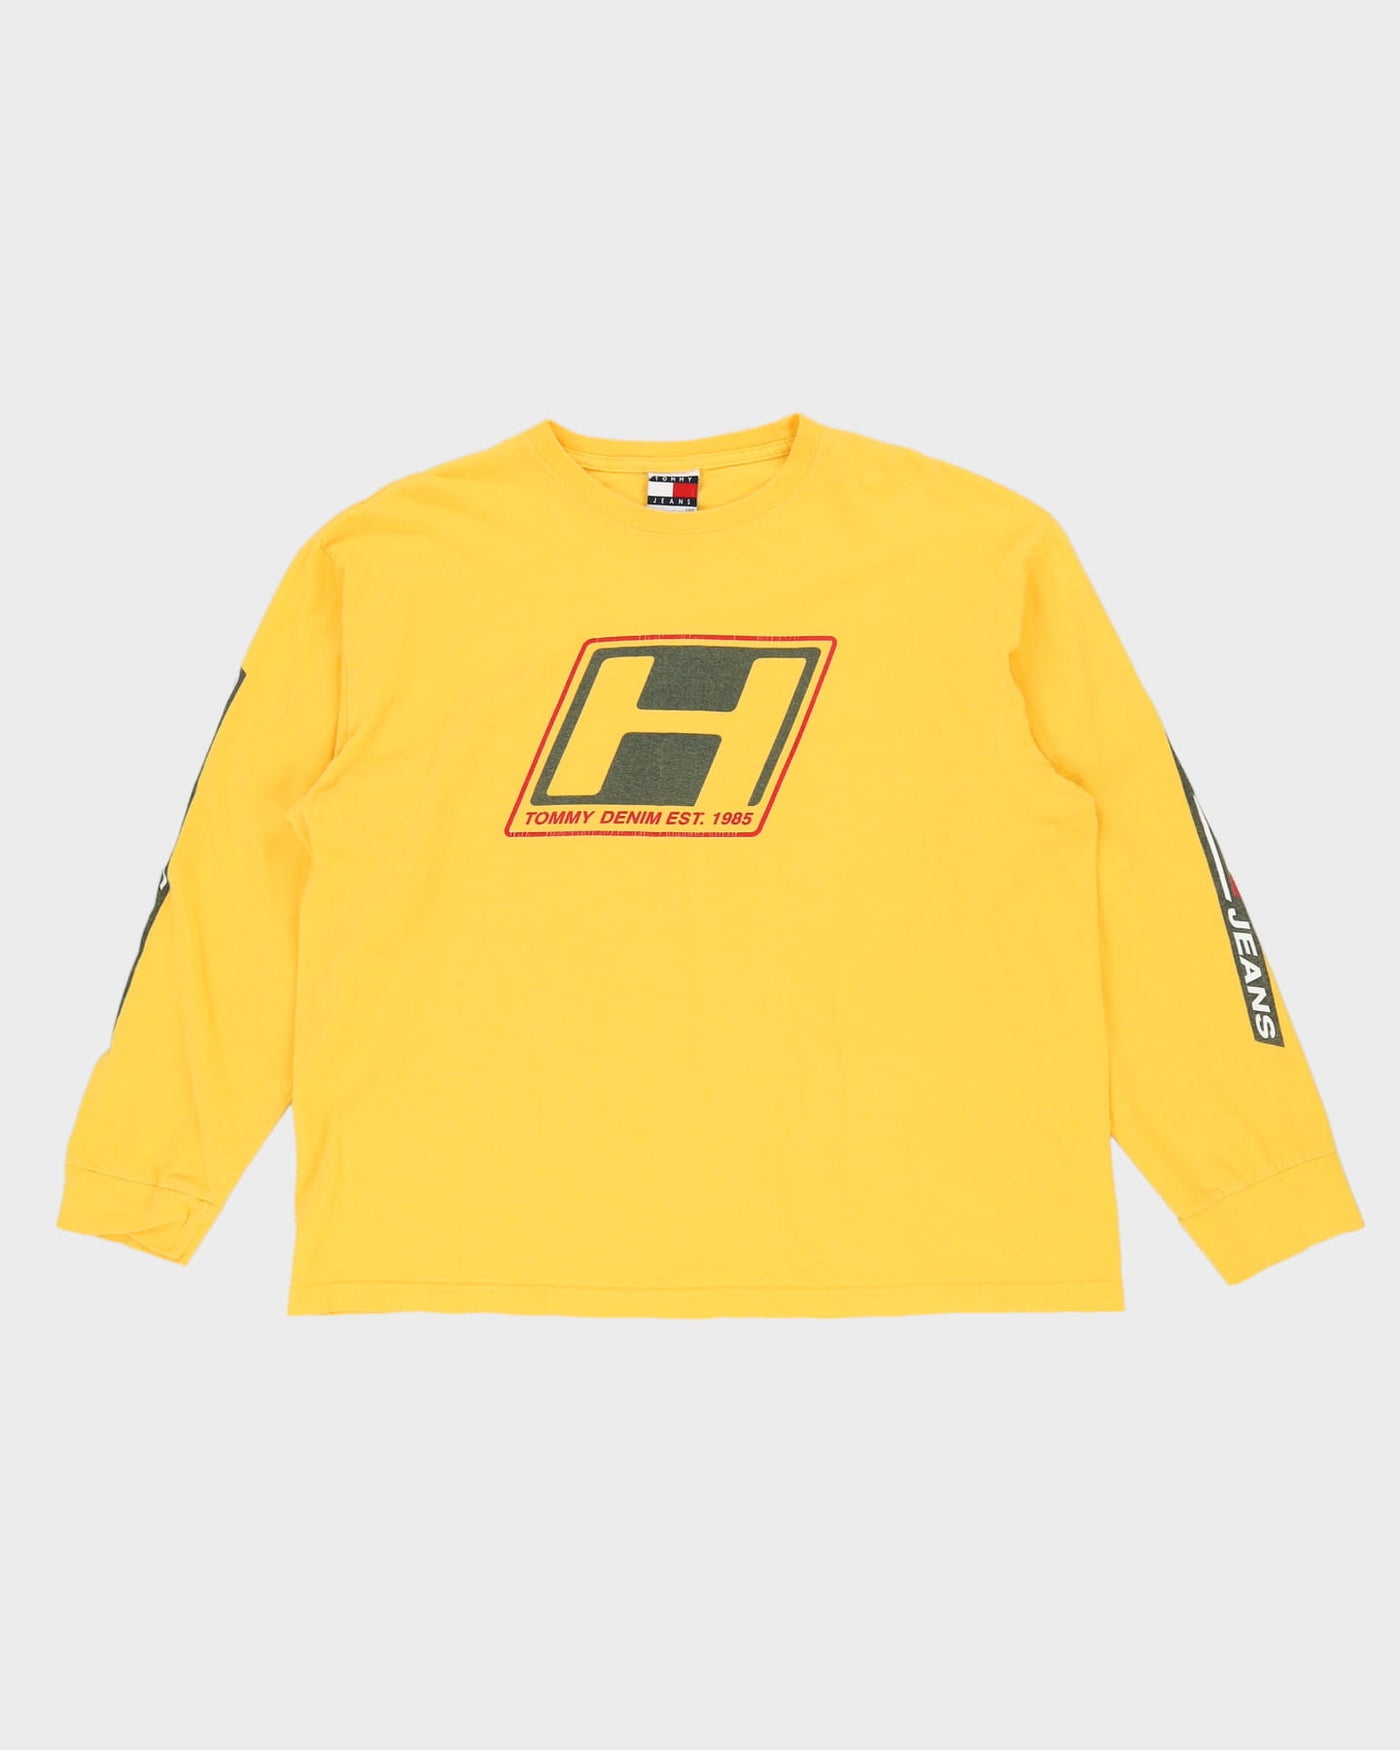 90s Tommy Hilfiger Yellow Long Sleeve Graphic T-Shirt - L